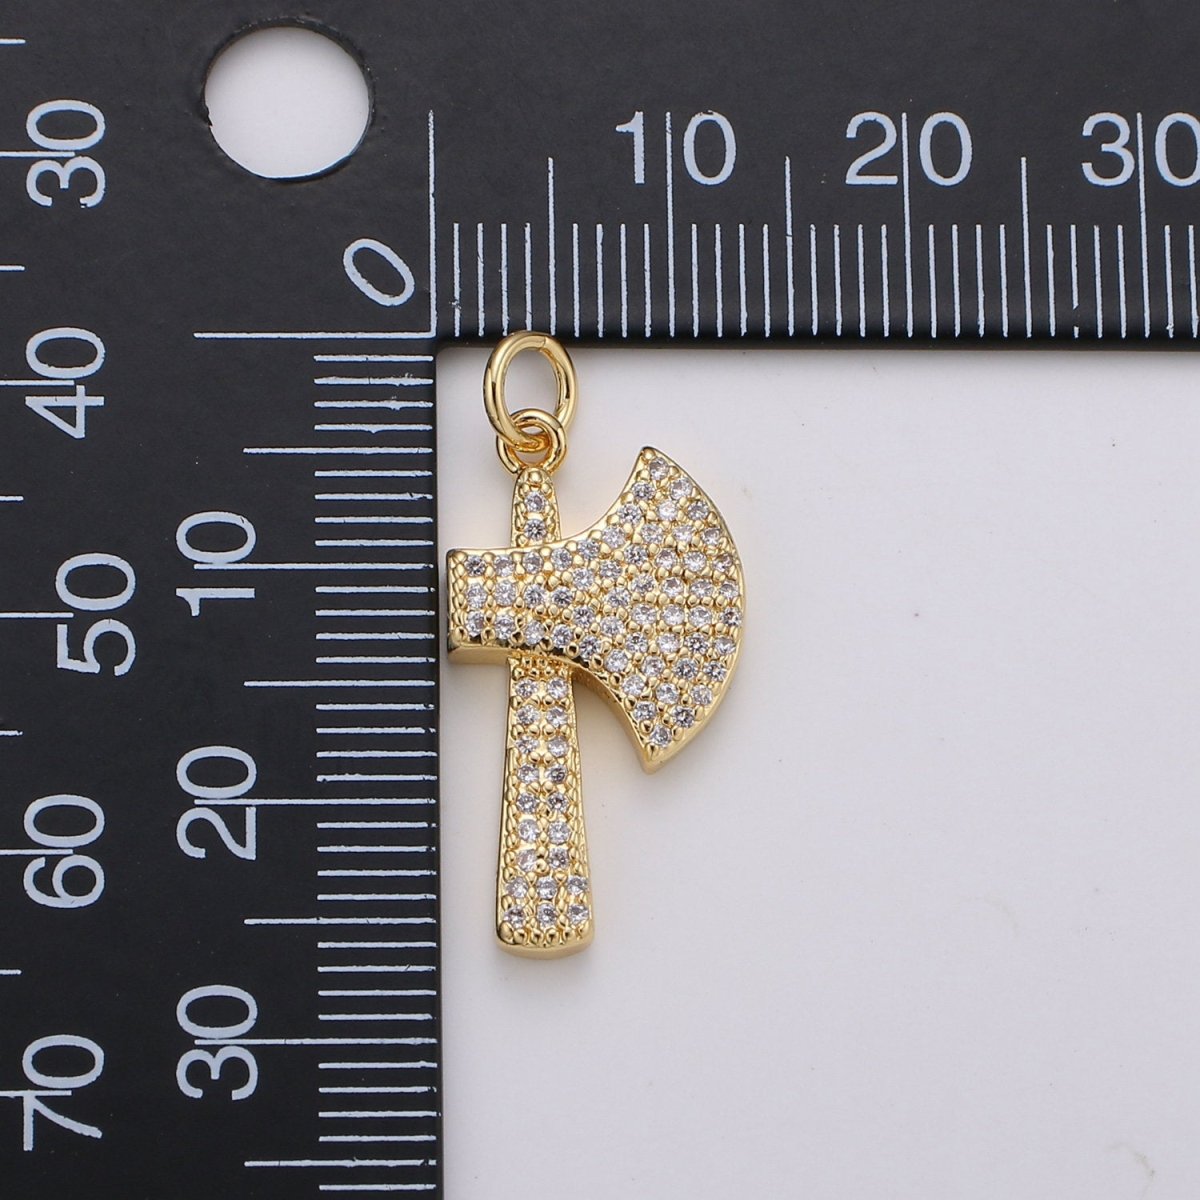 24k Gold Filled Micro Pave Axe Charm, Cubic Zirconia Viking Axe Pendant Charm, Gold Filled Charm, For DIY Jewelry D-114 - DLUXCA